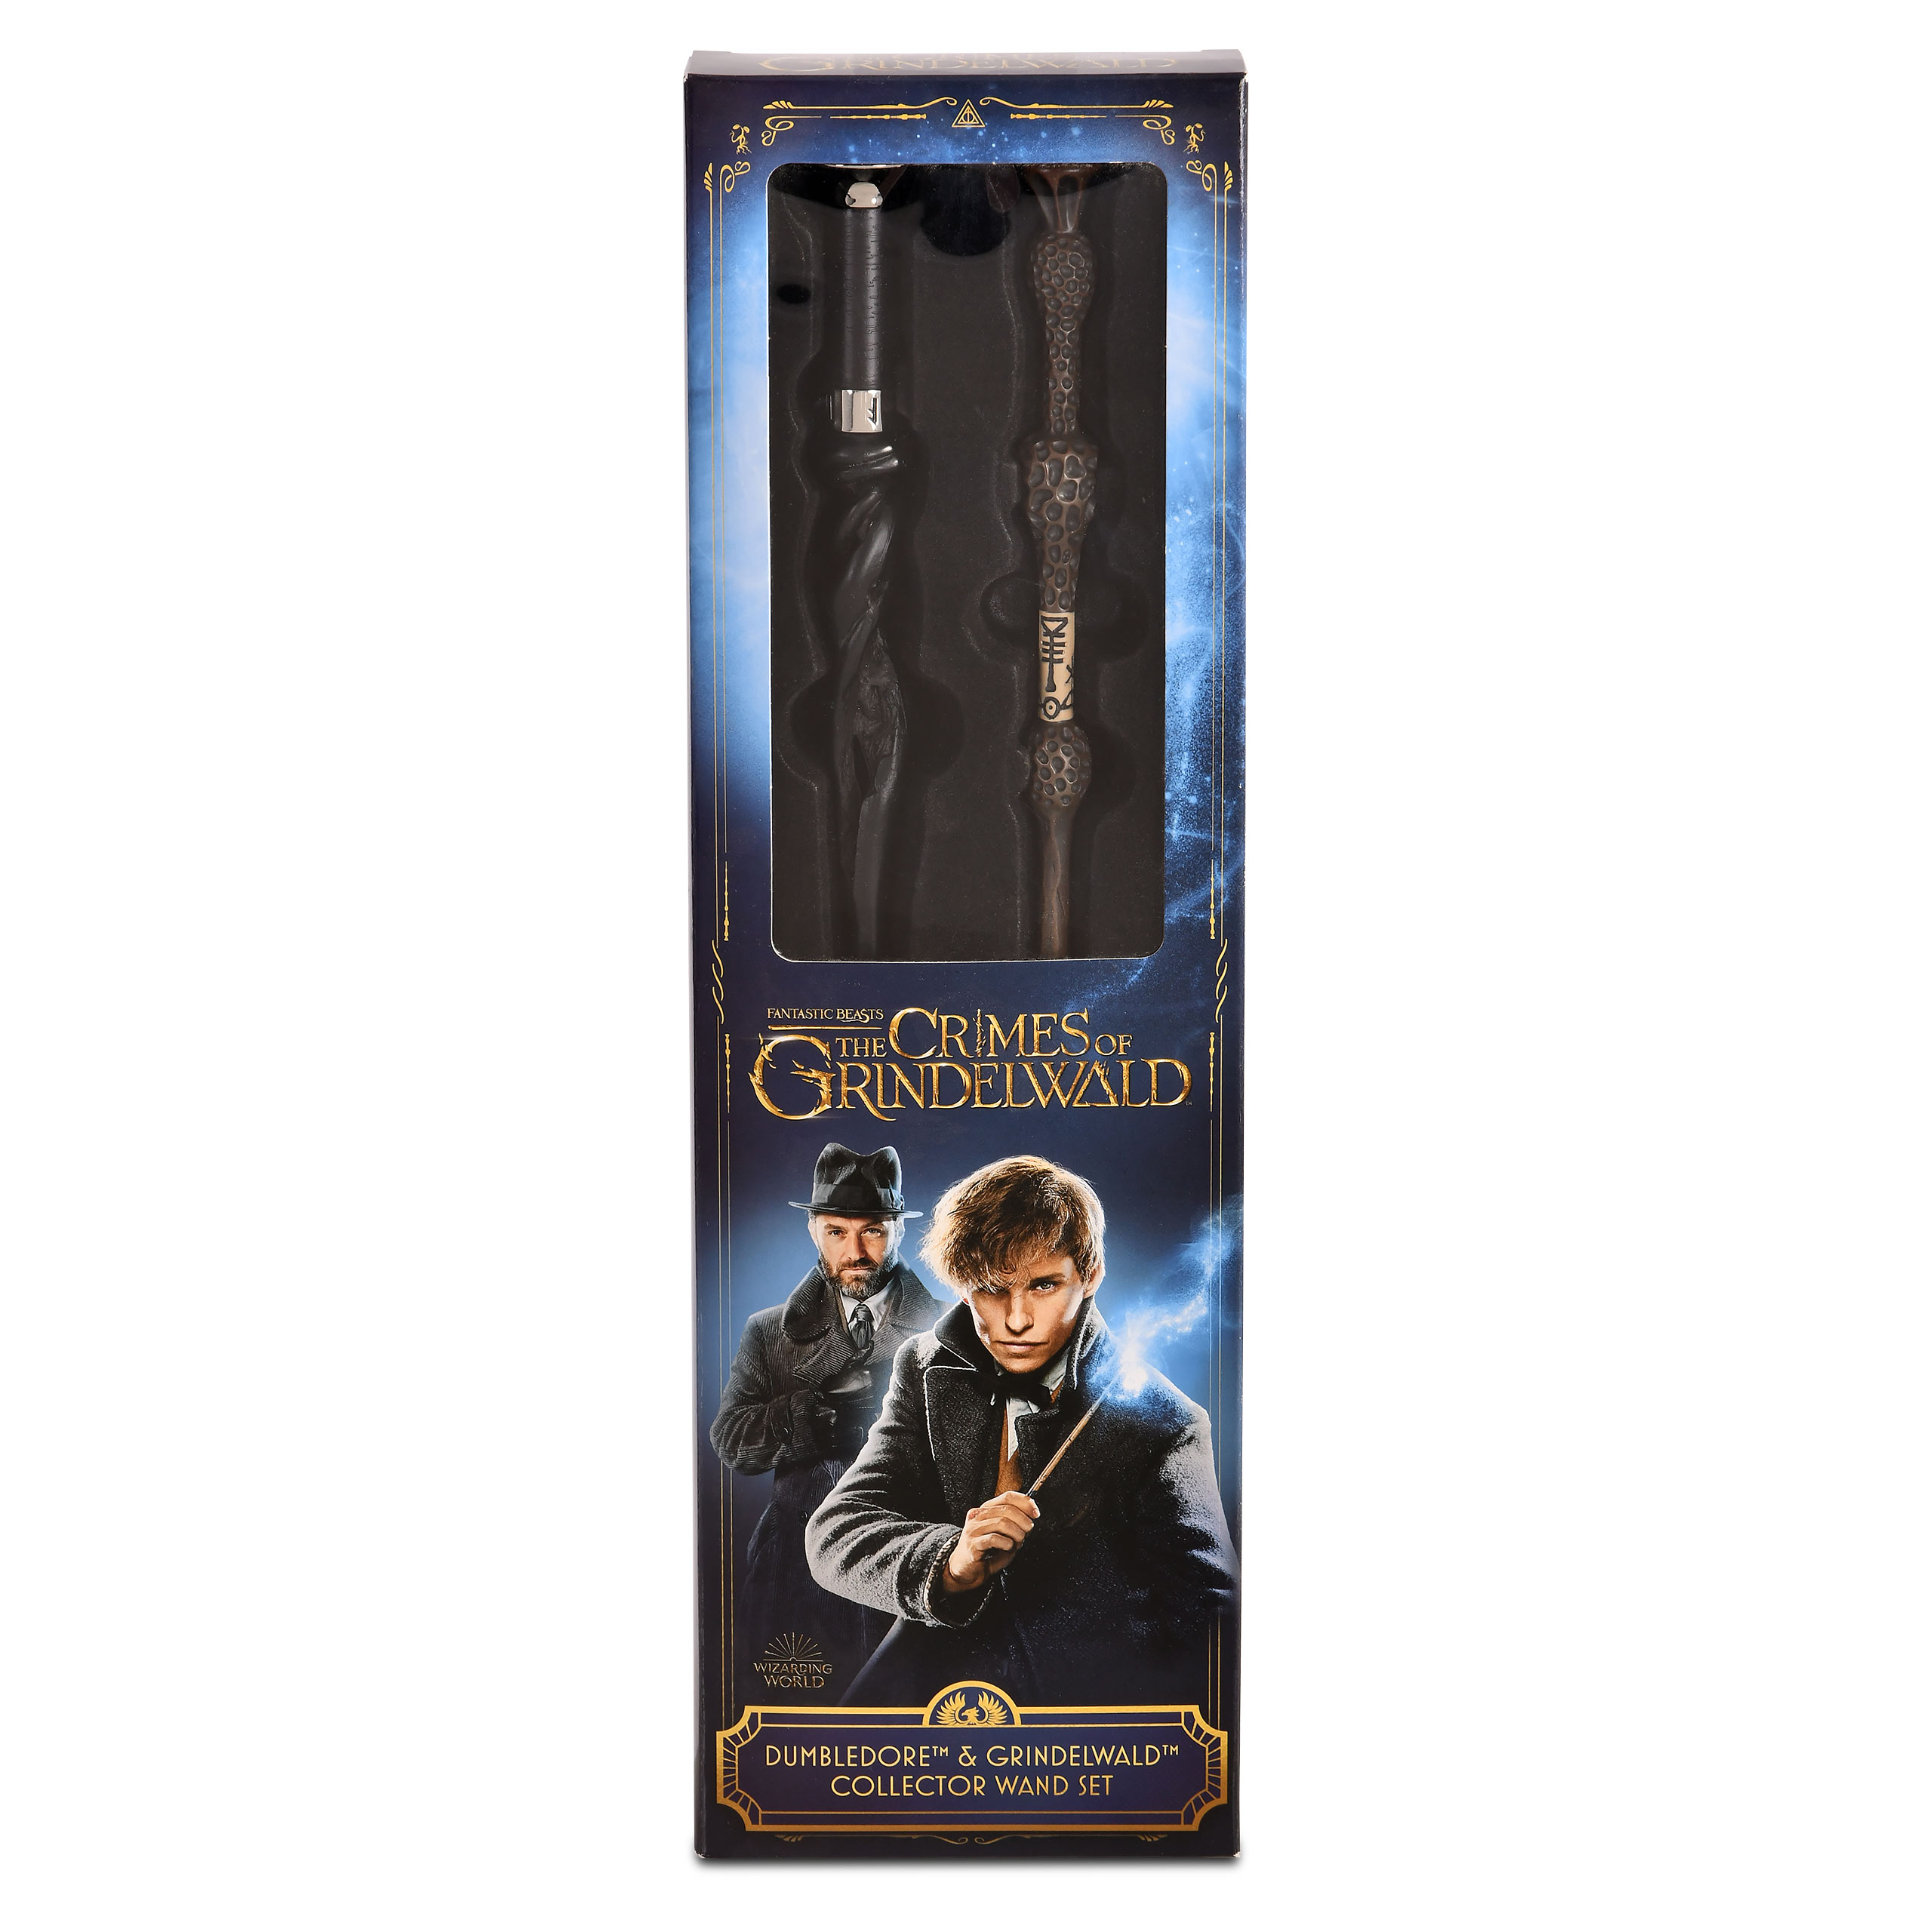 Dumbledore and Grindelwald Wand Collection in Blister - Fantastic Beasts